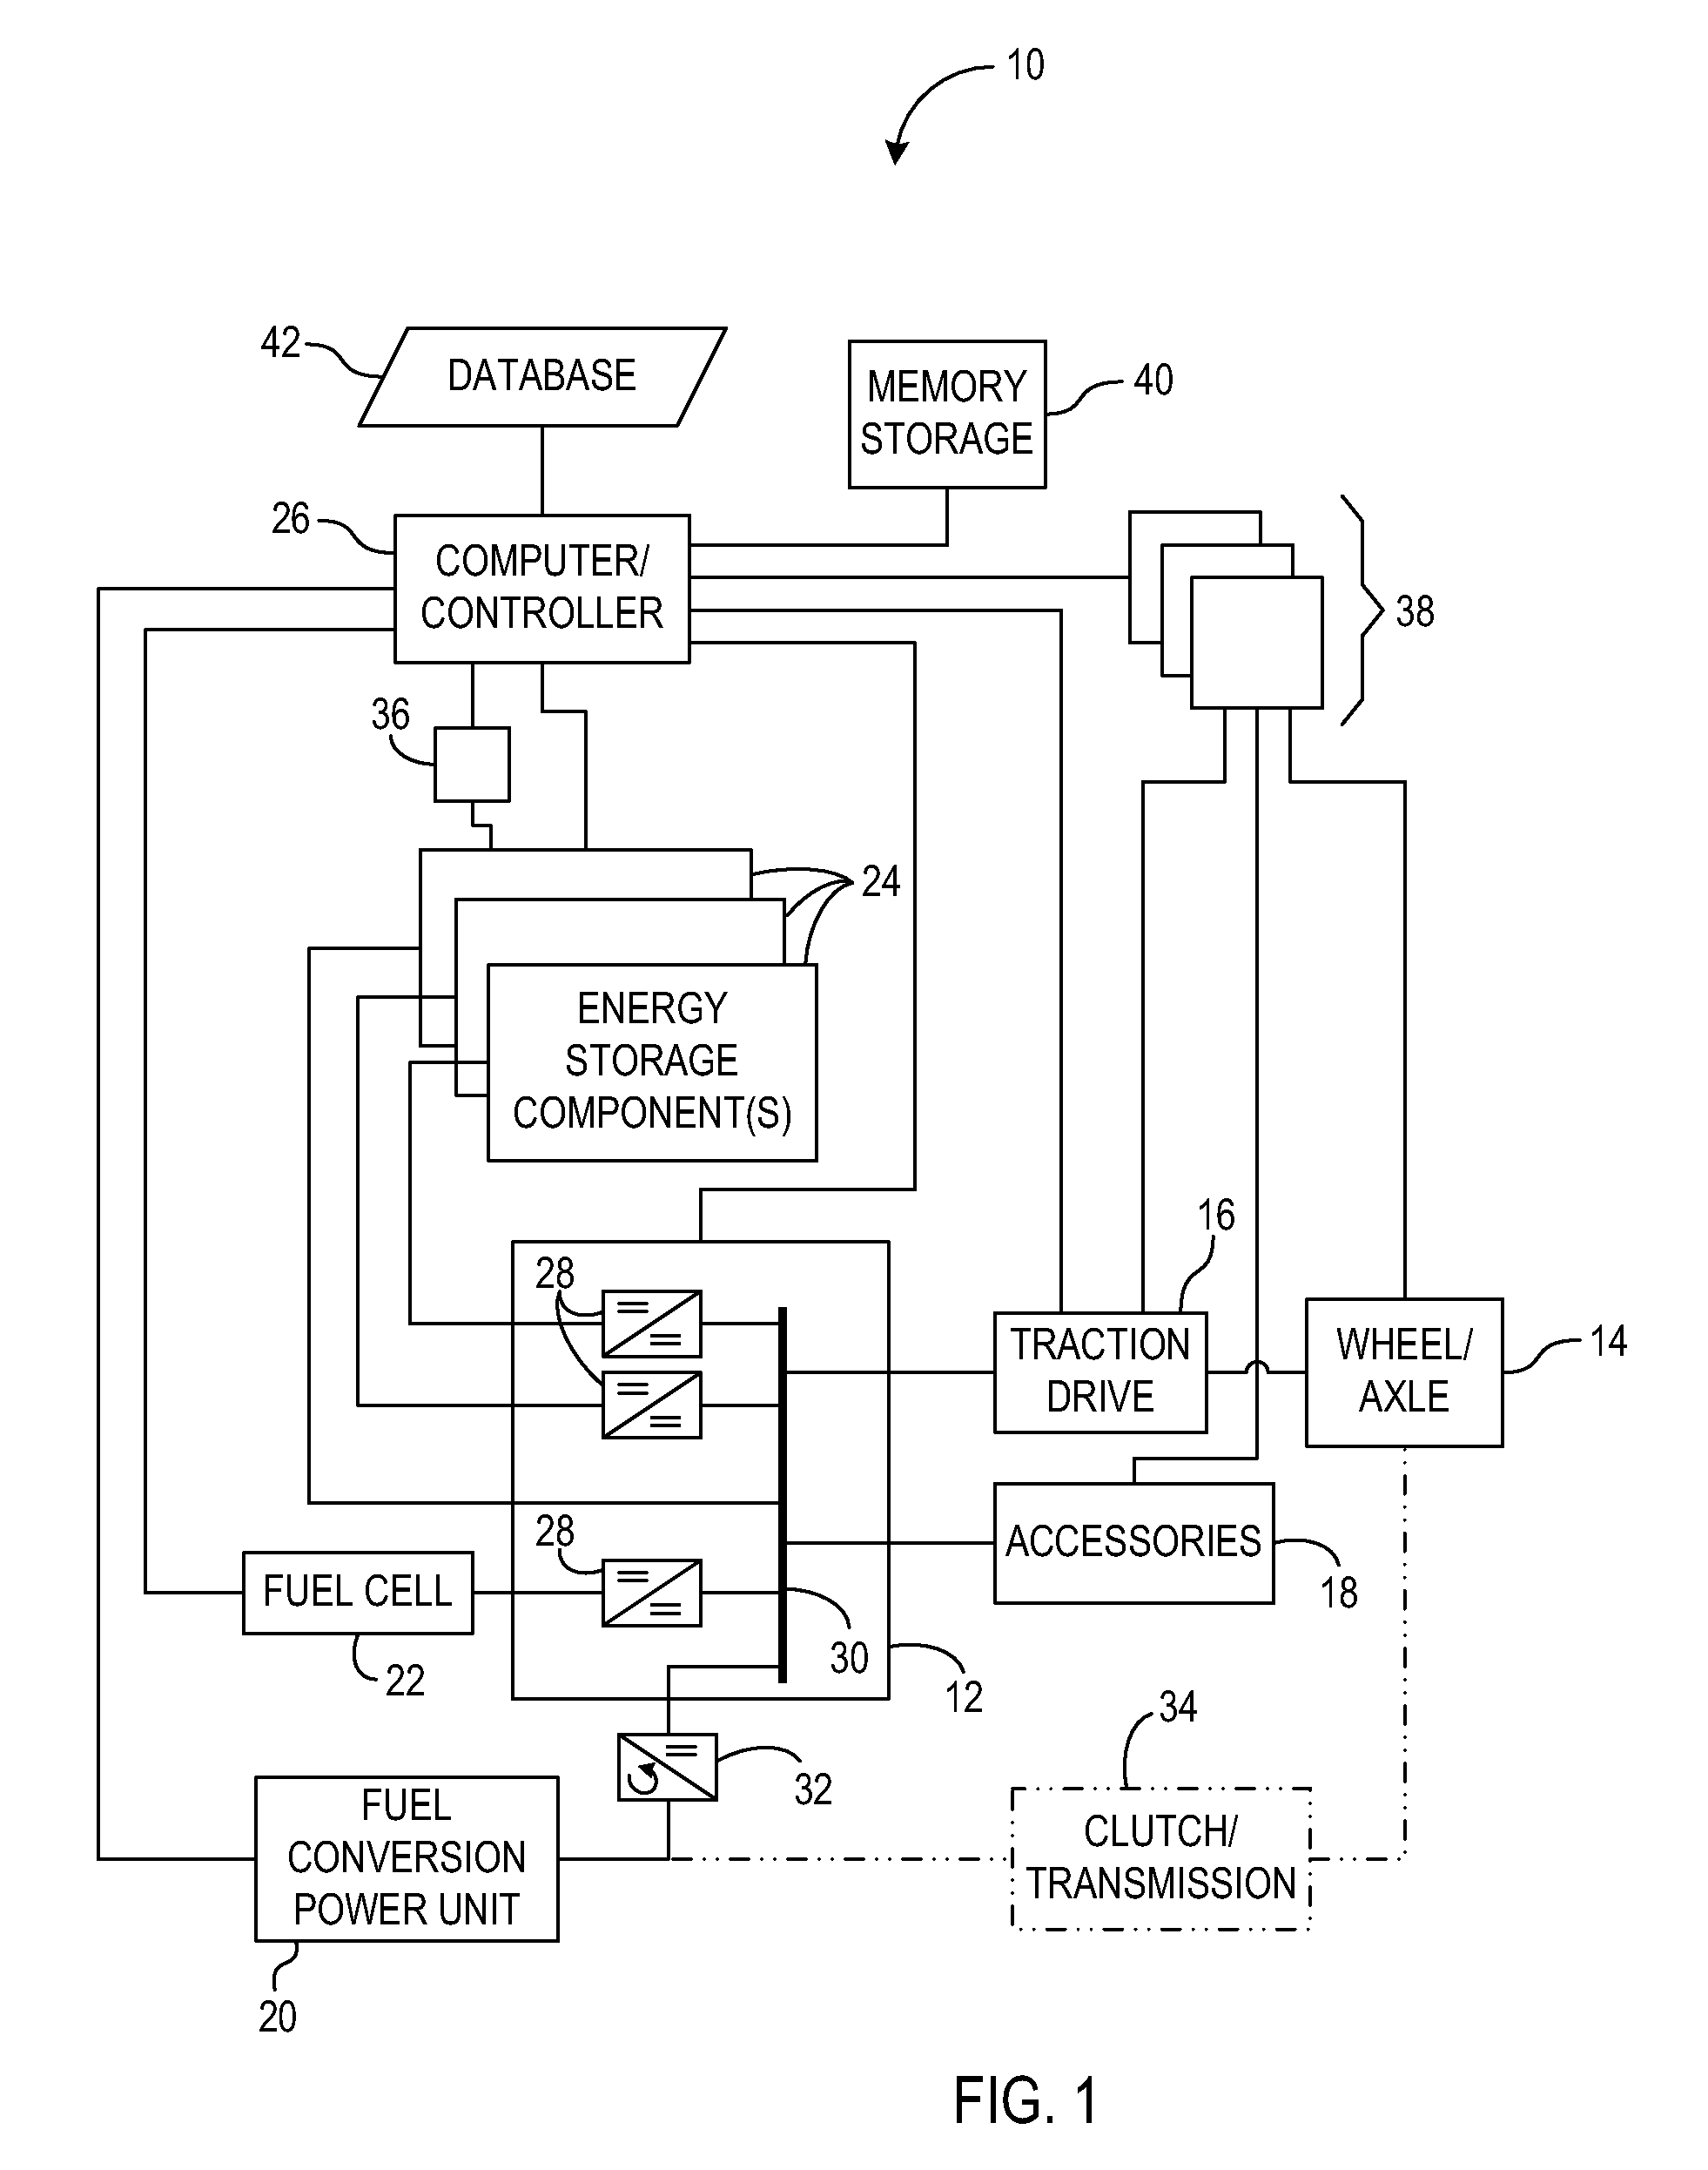 System and method for optimizing energy storage component usage